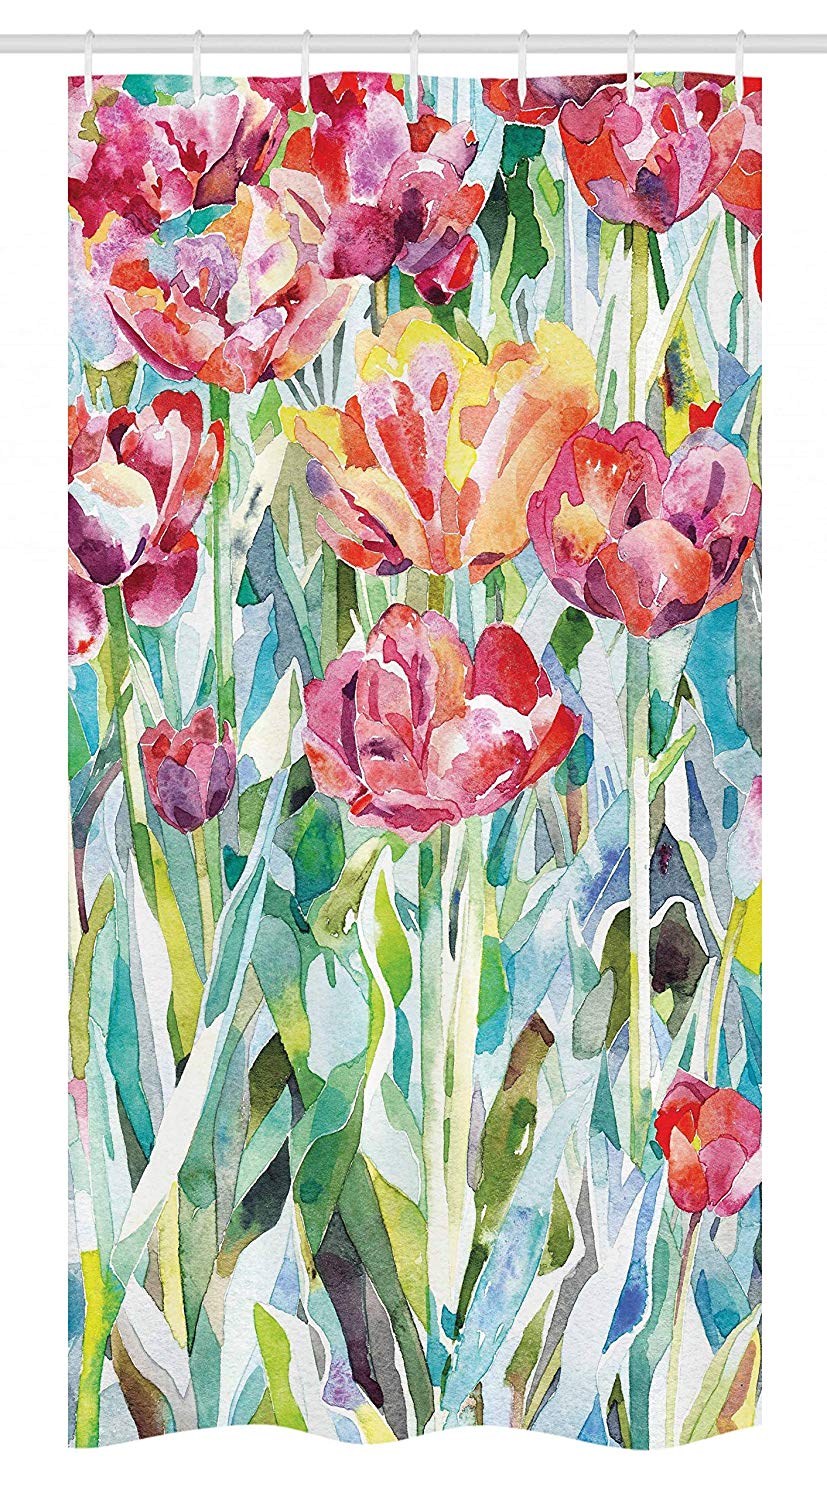 Ambesonne Watercolor Flower Stall Shower Curtain, Painting of Summer Spring Flowers in Faded Colors Floral Seasonal Print, Fabric Bathroom Decor Set with Hooks, 36" X 72", Multicolor